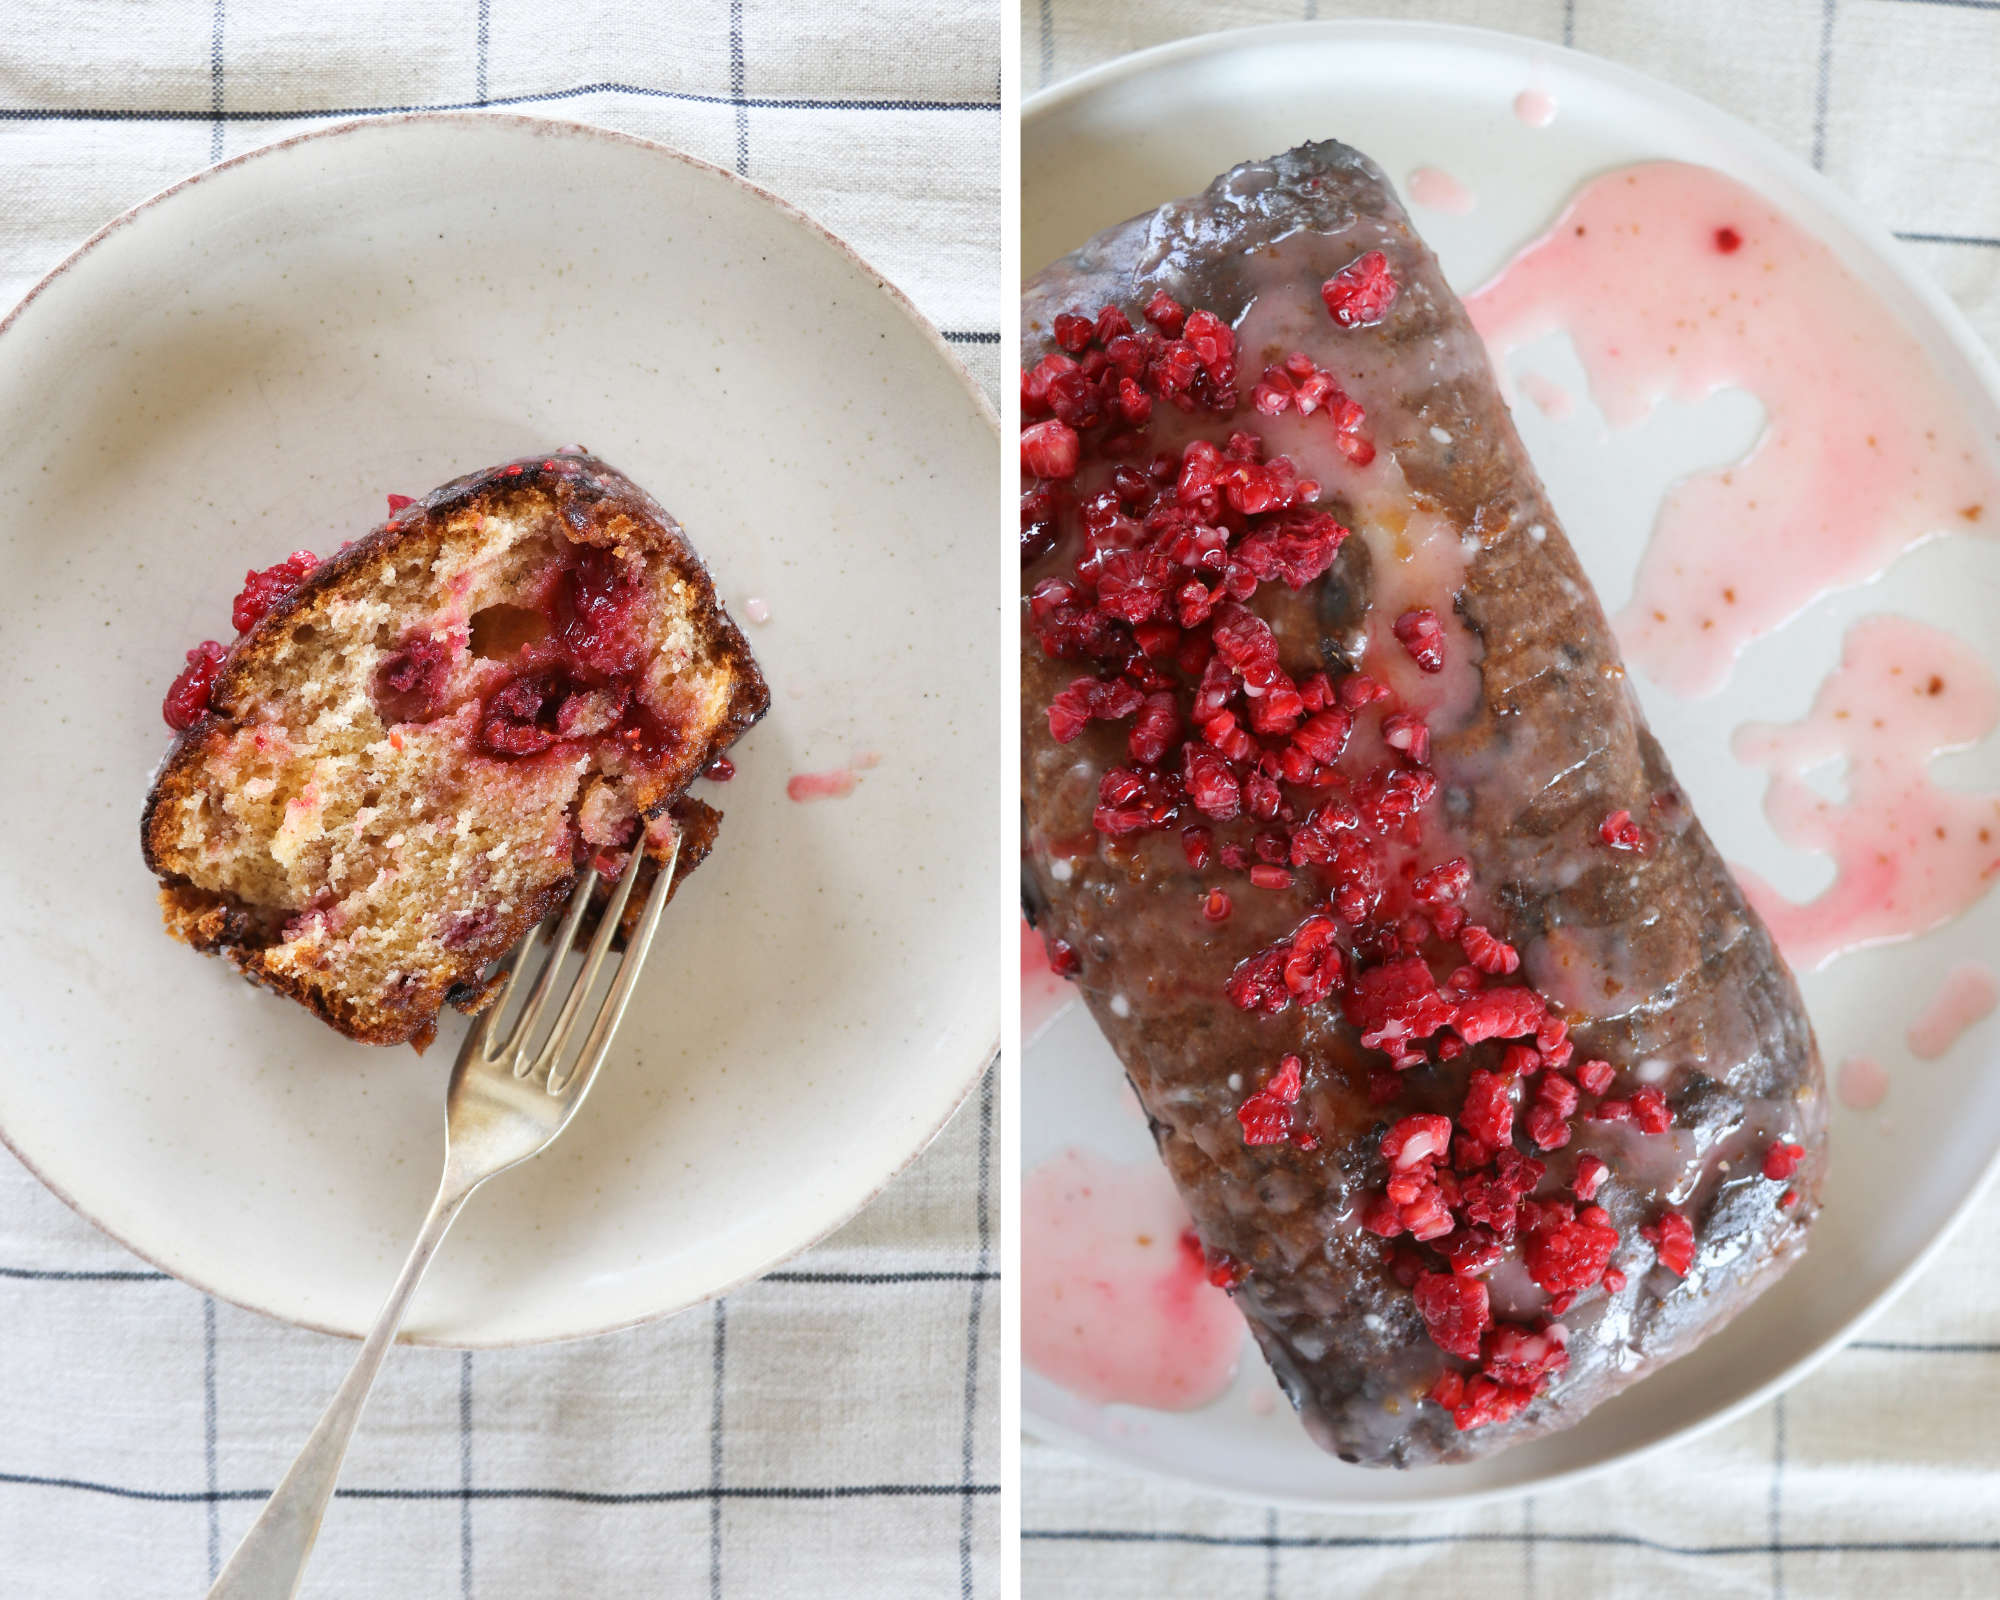 Lemon and Raspberry Drizzle Loaf Cake